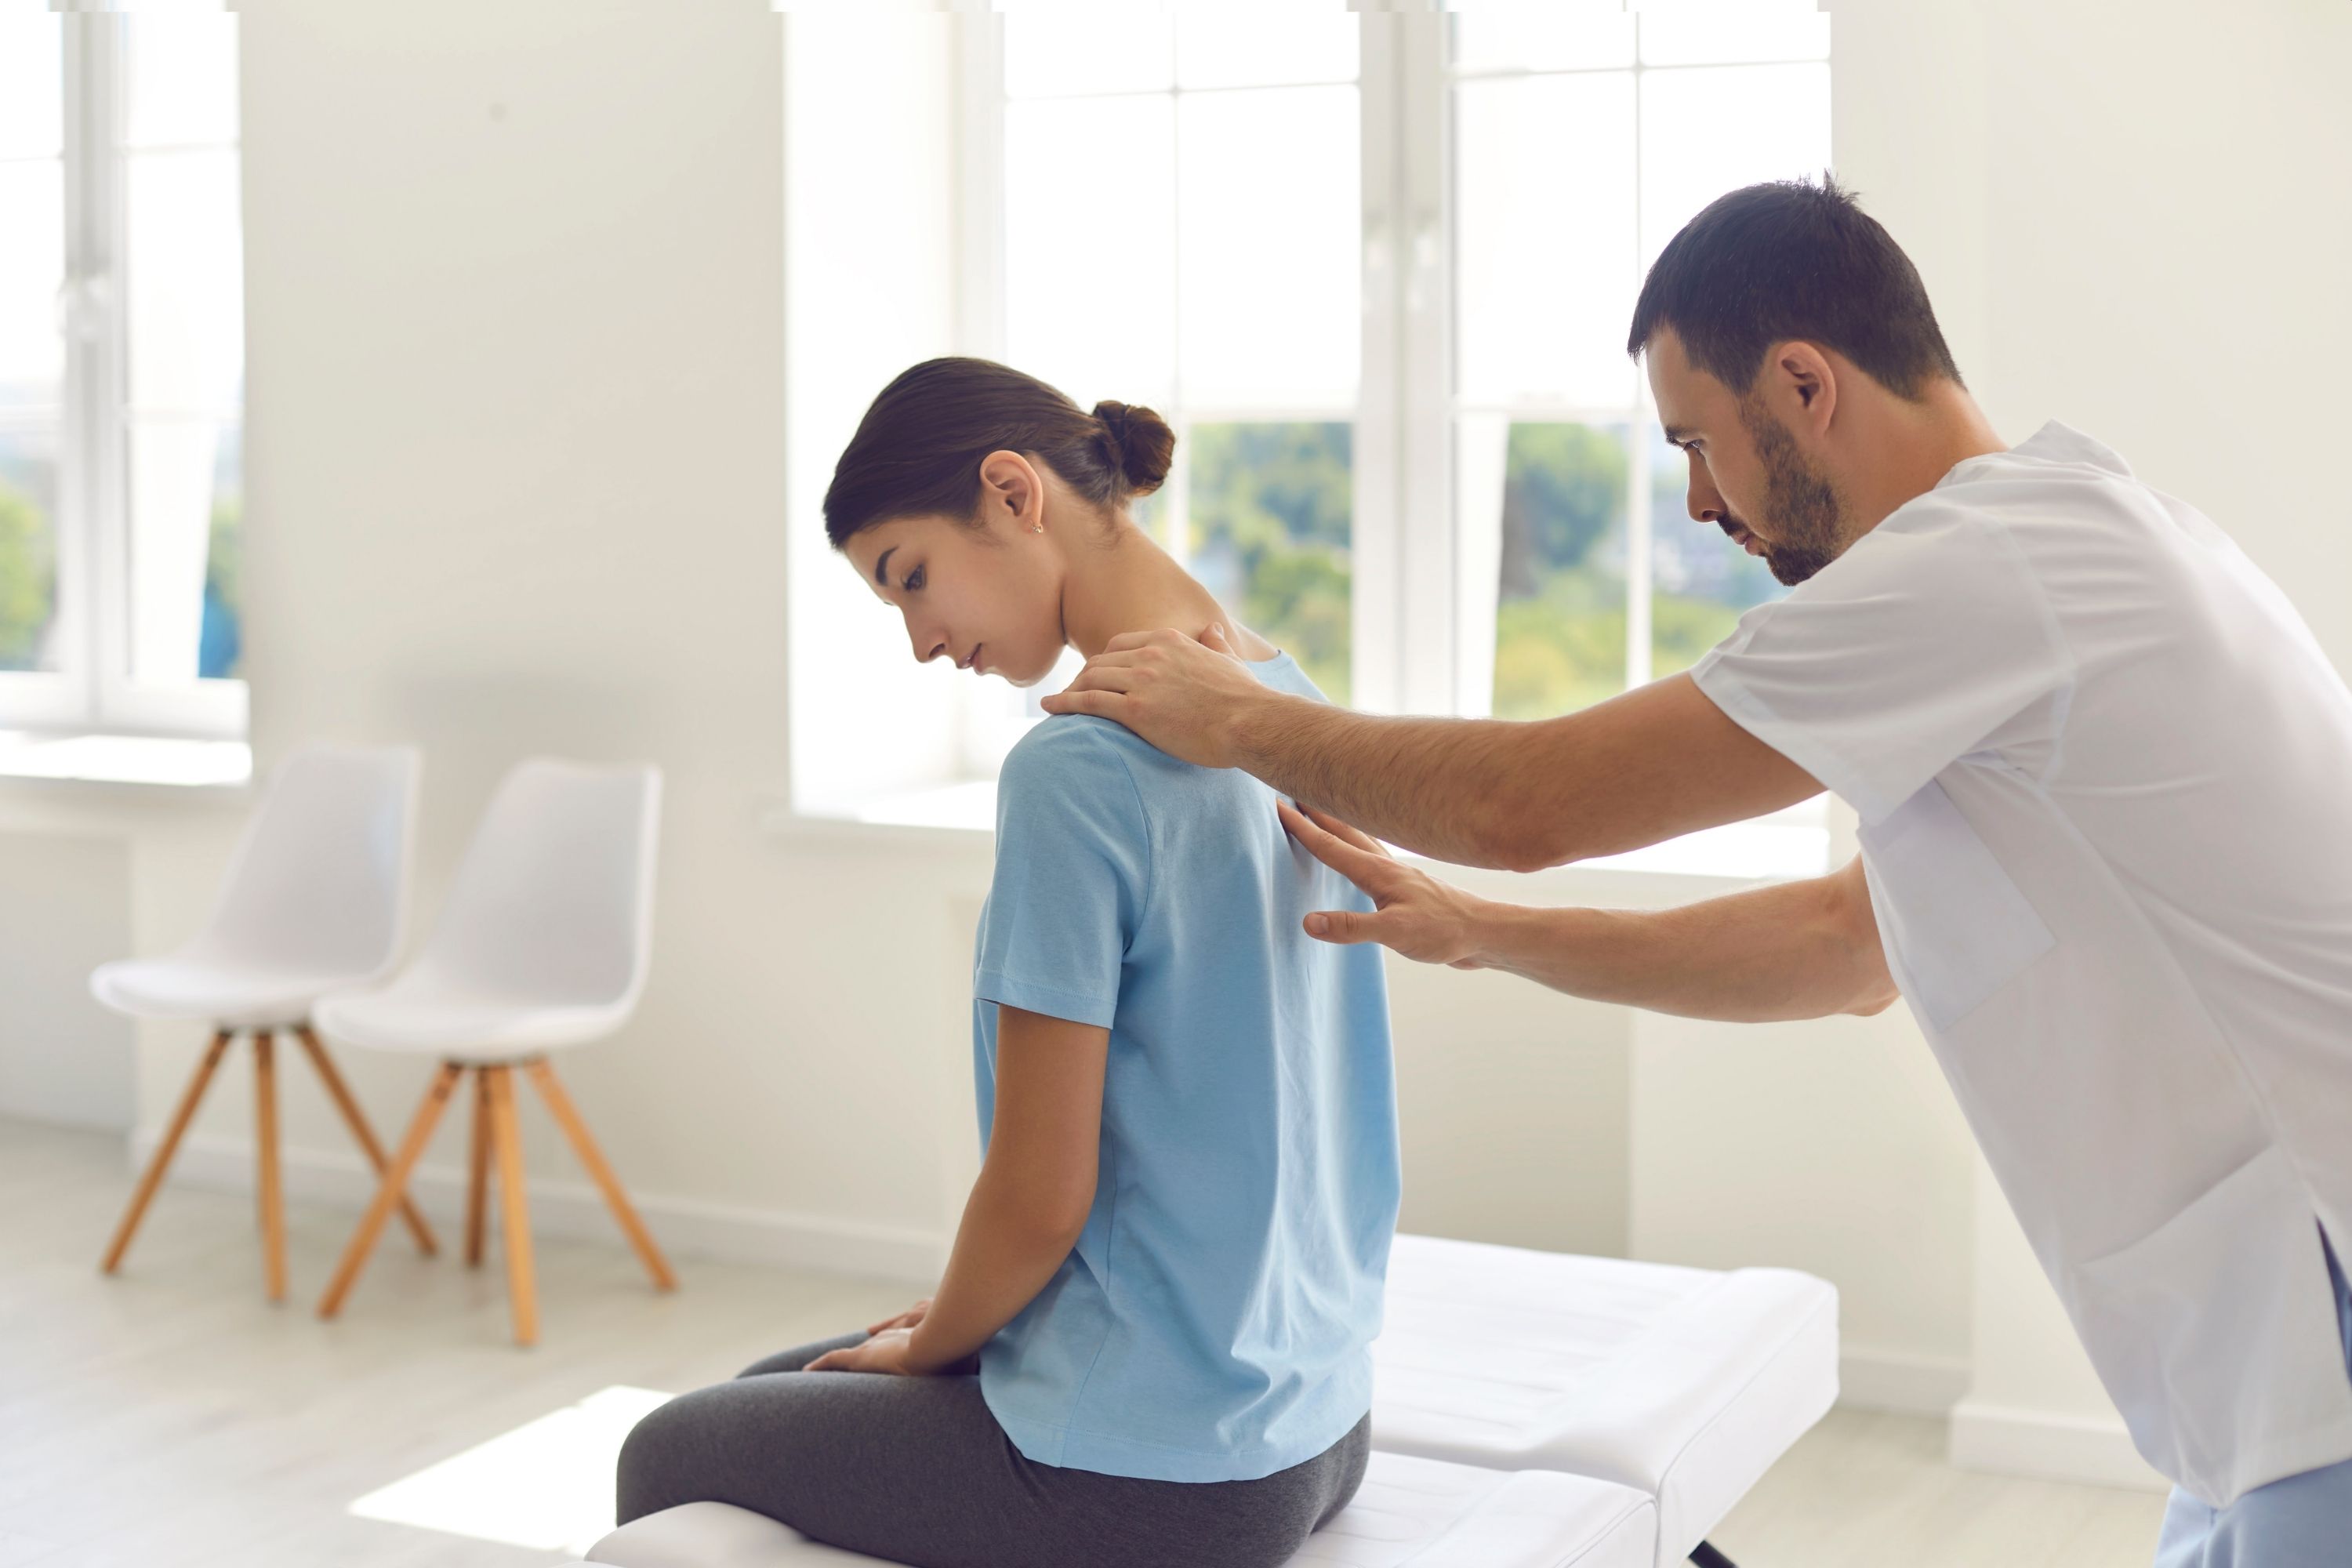 What to Wear to Physical Therapy For Your Back